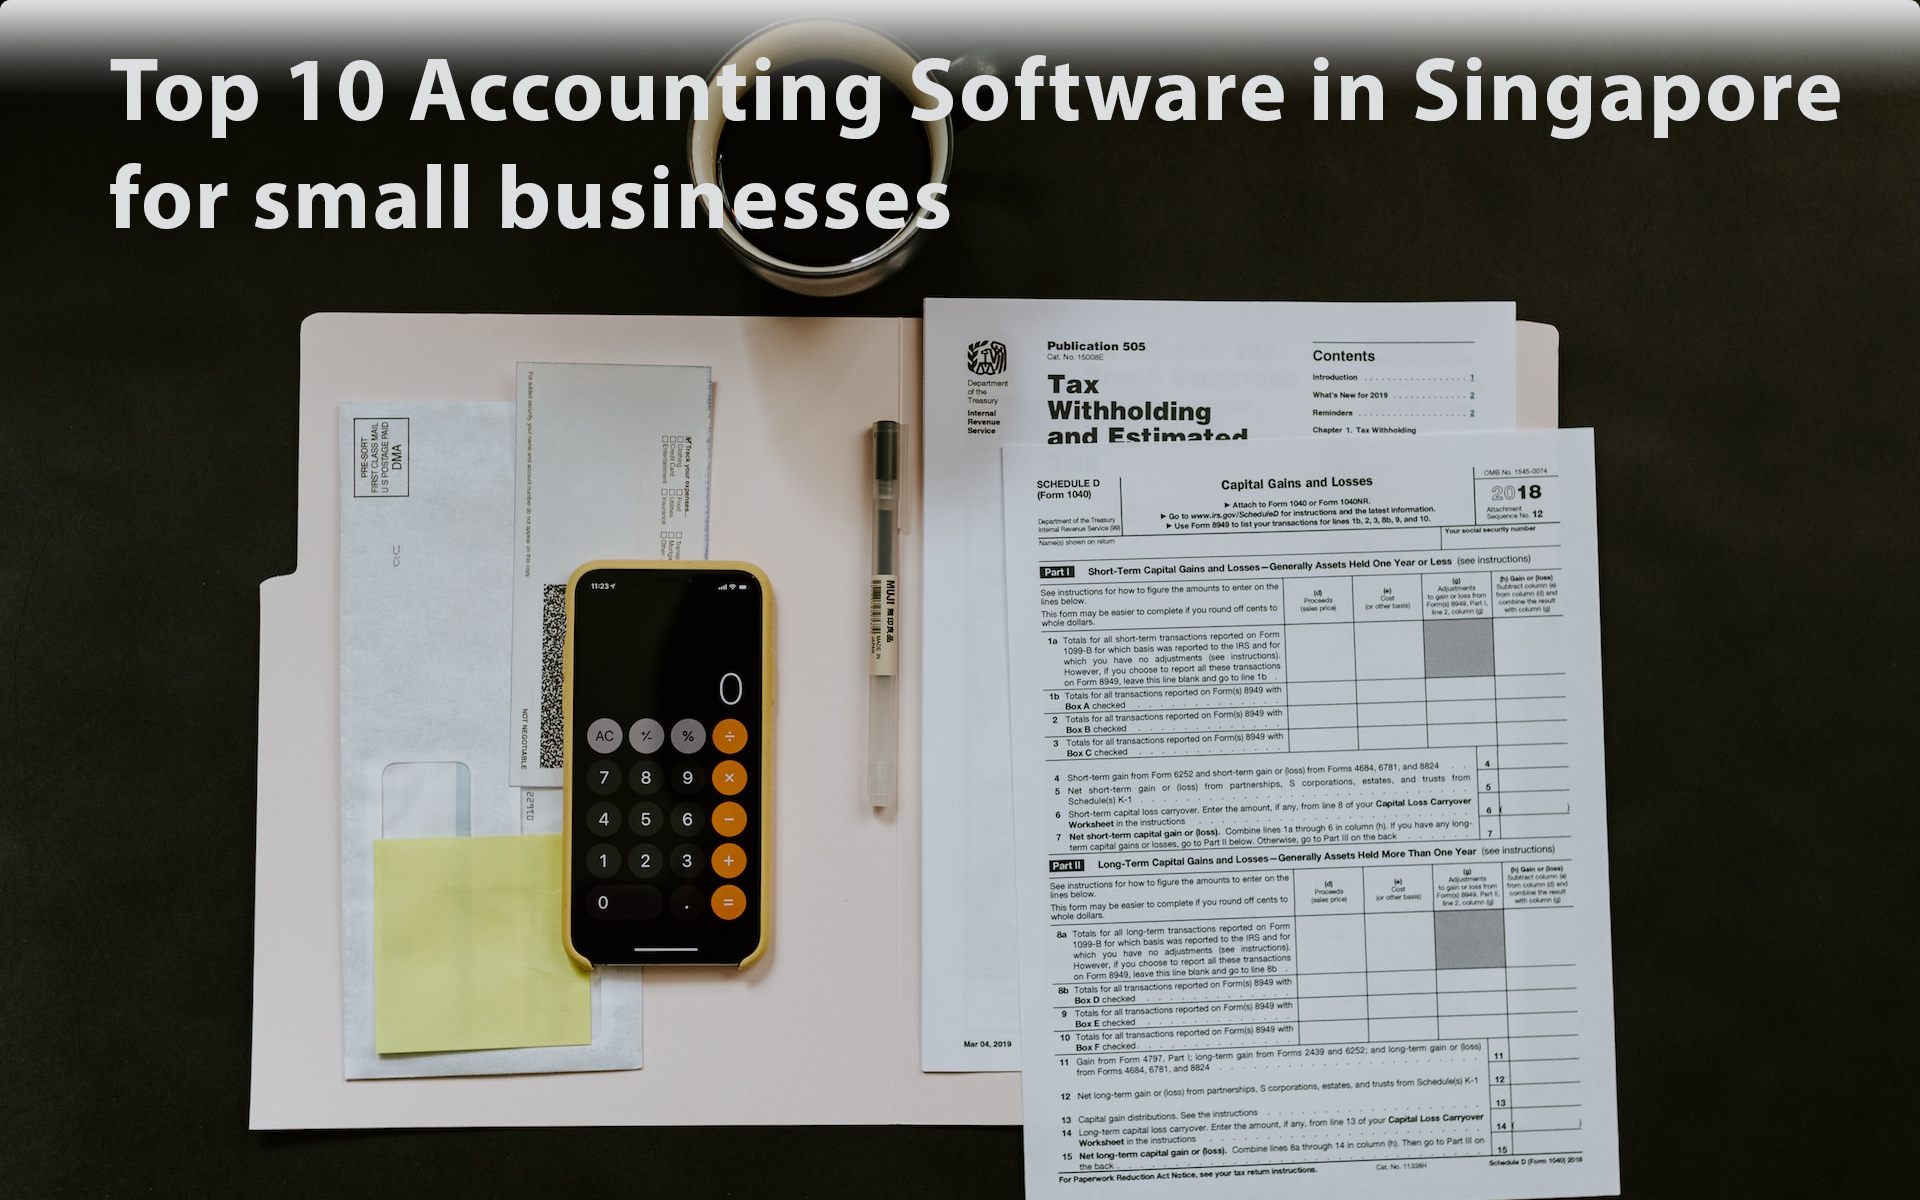 Top 10 Accounting Software in Singapore for small businesses